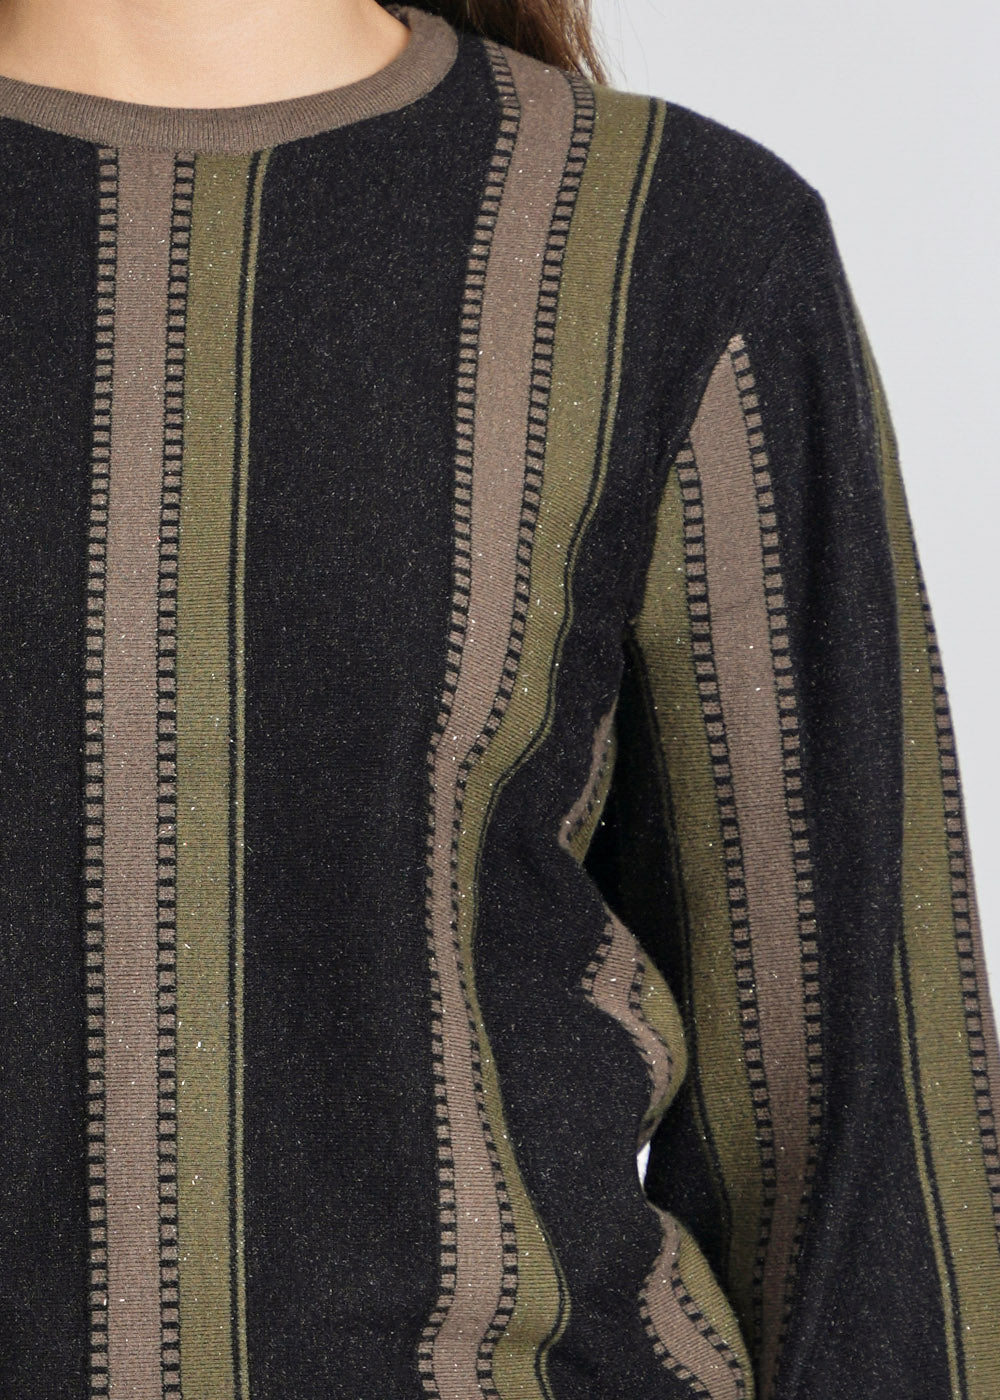 Olive Knit Sweater with Black Lanes